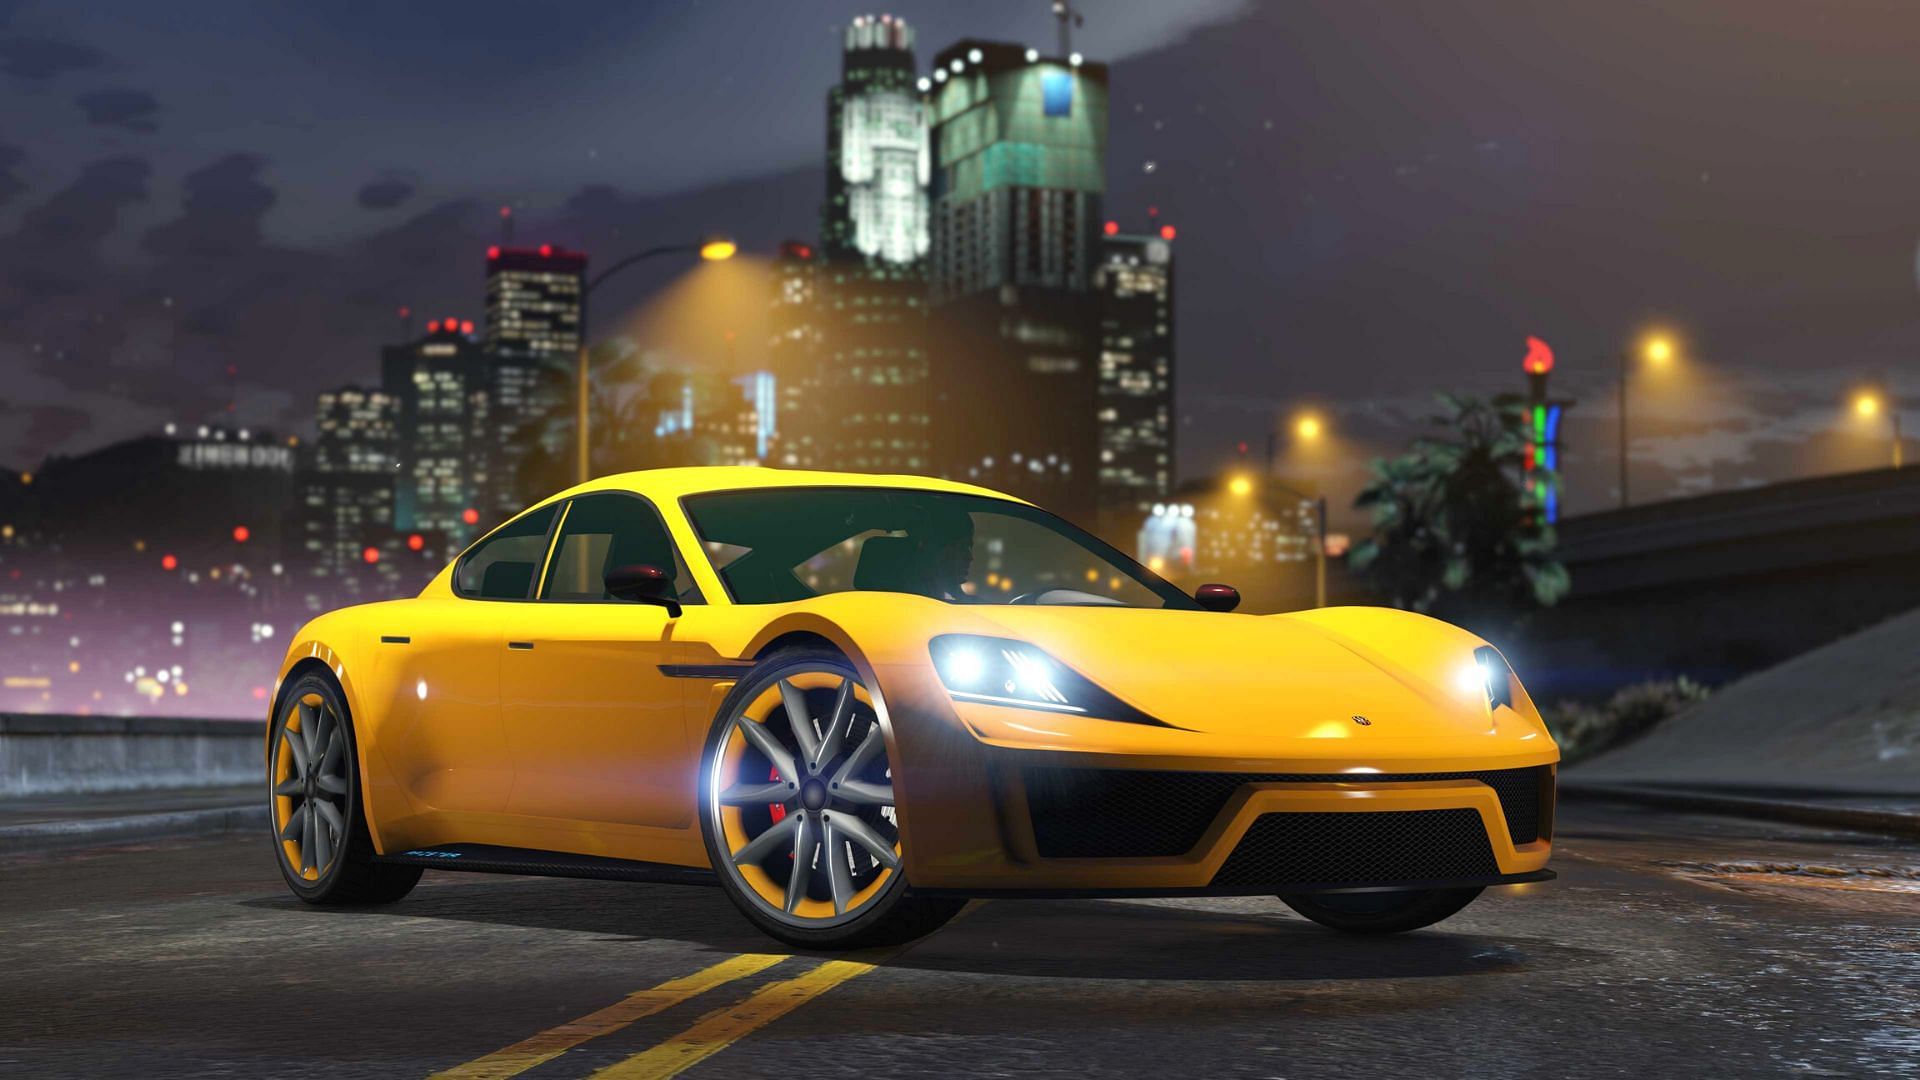 There are many vehicles based on real-life cars in GTA Online (Image via Rockstar Games)